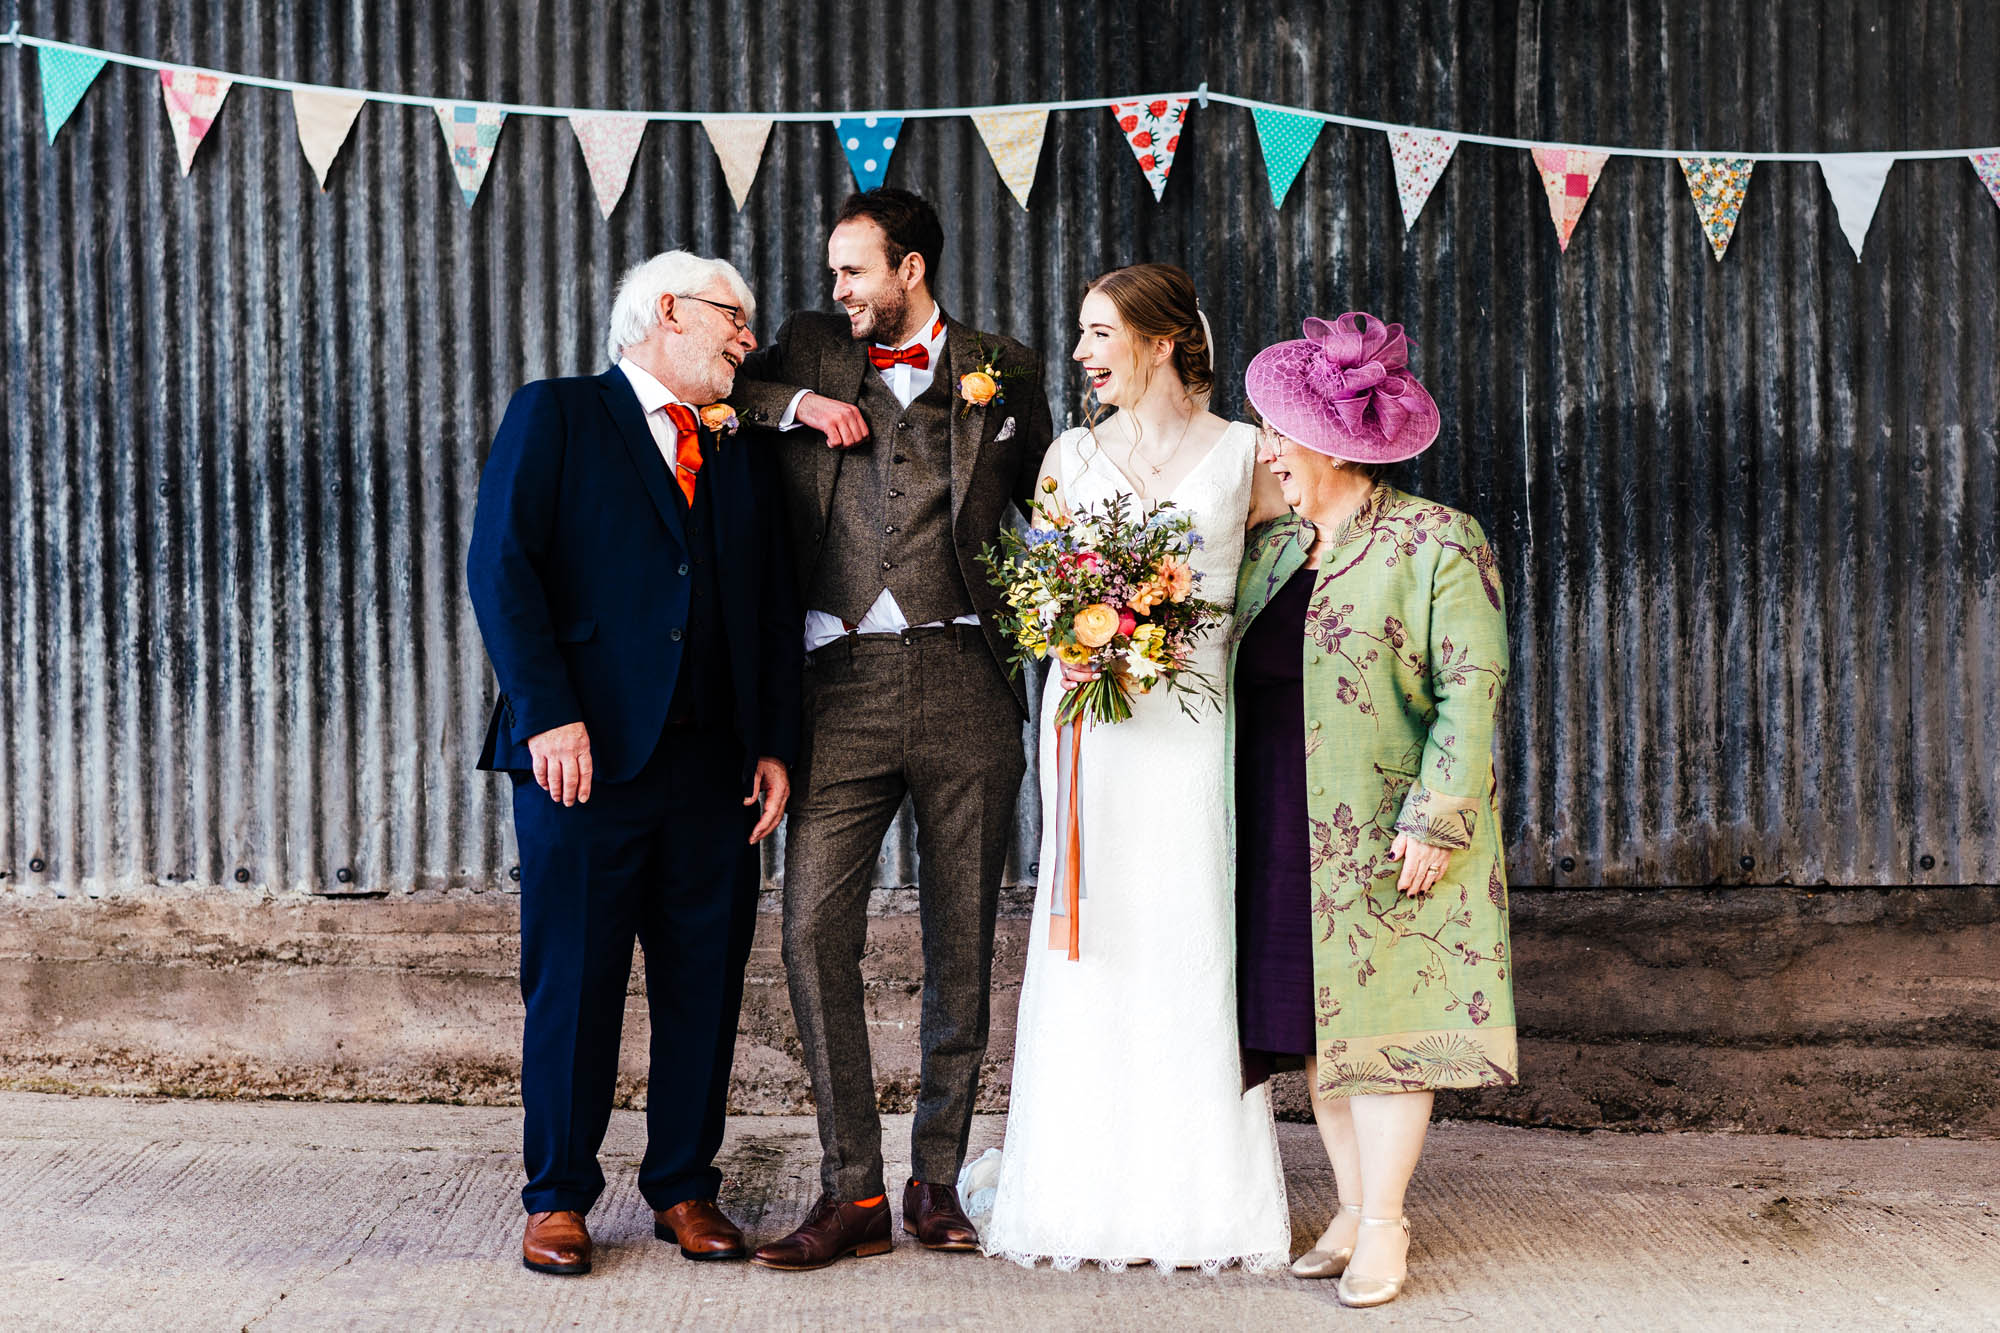 informal wedding group photo of a groom and bride with family members. They're relaxed and having a giggle together so the shot doesn't look too formal. By Hannah Hall Photography